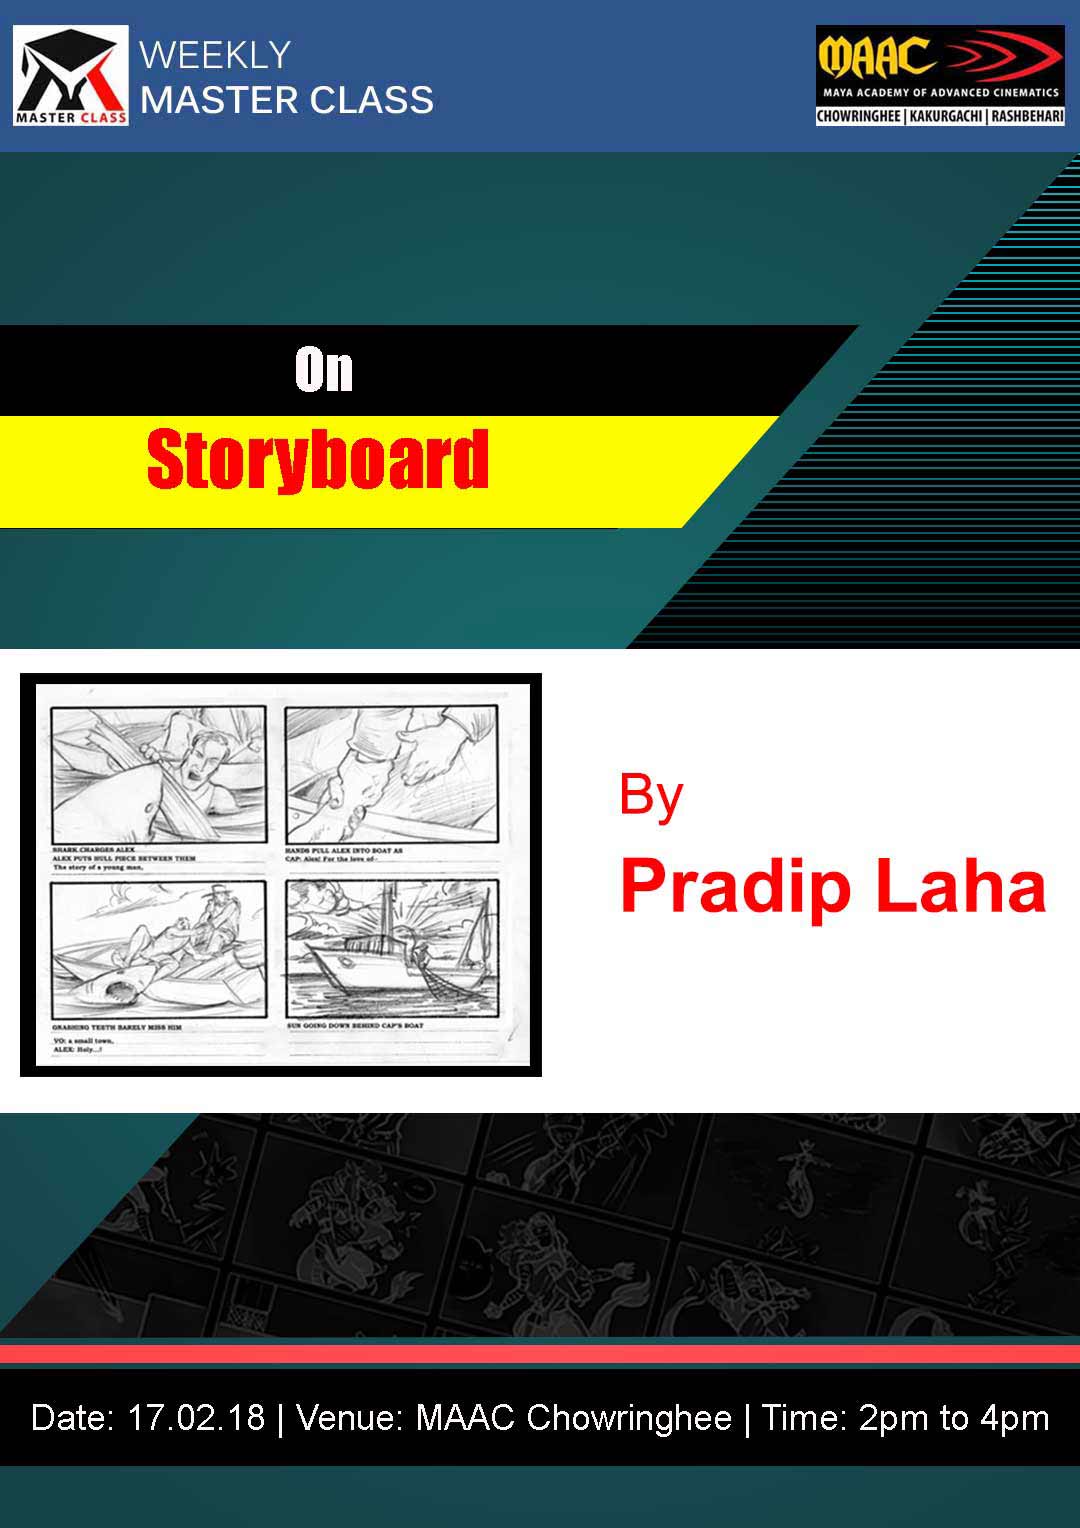 Weekly Master Class on Storyboarding